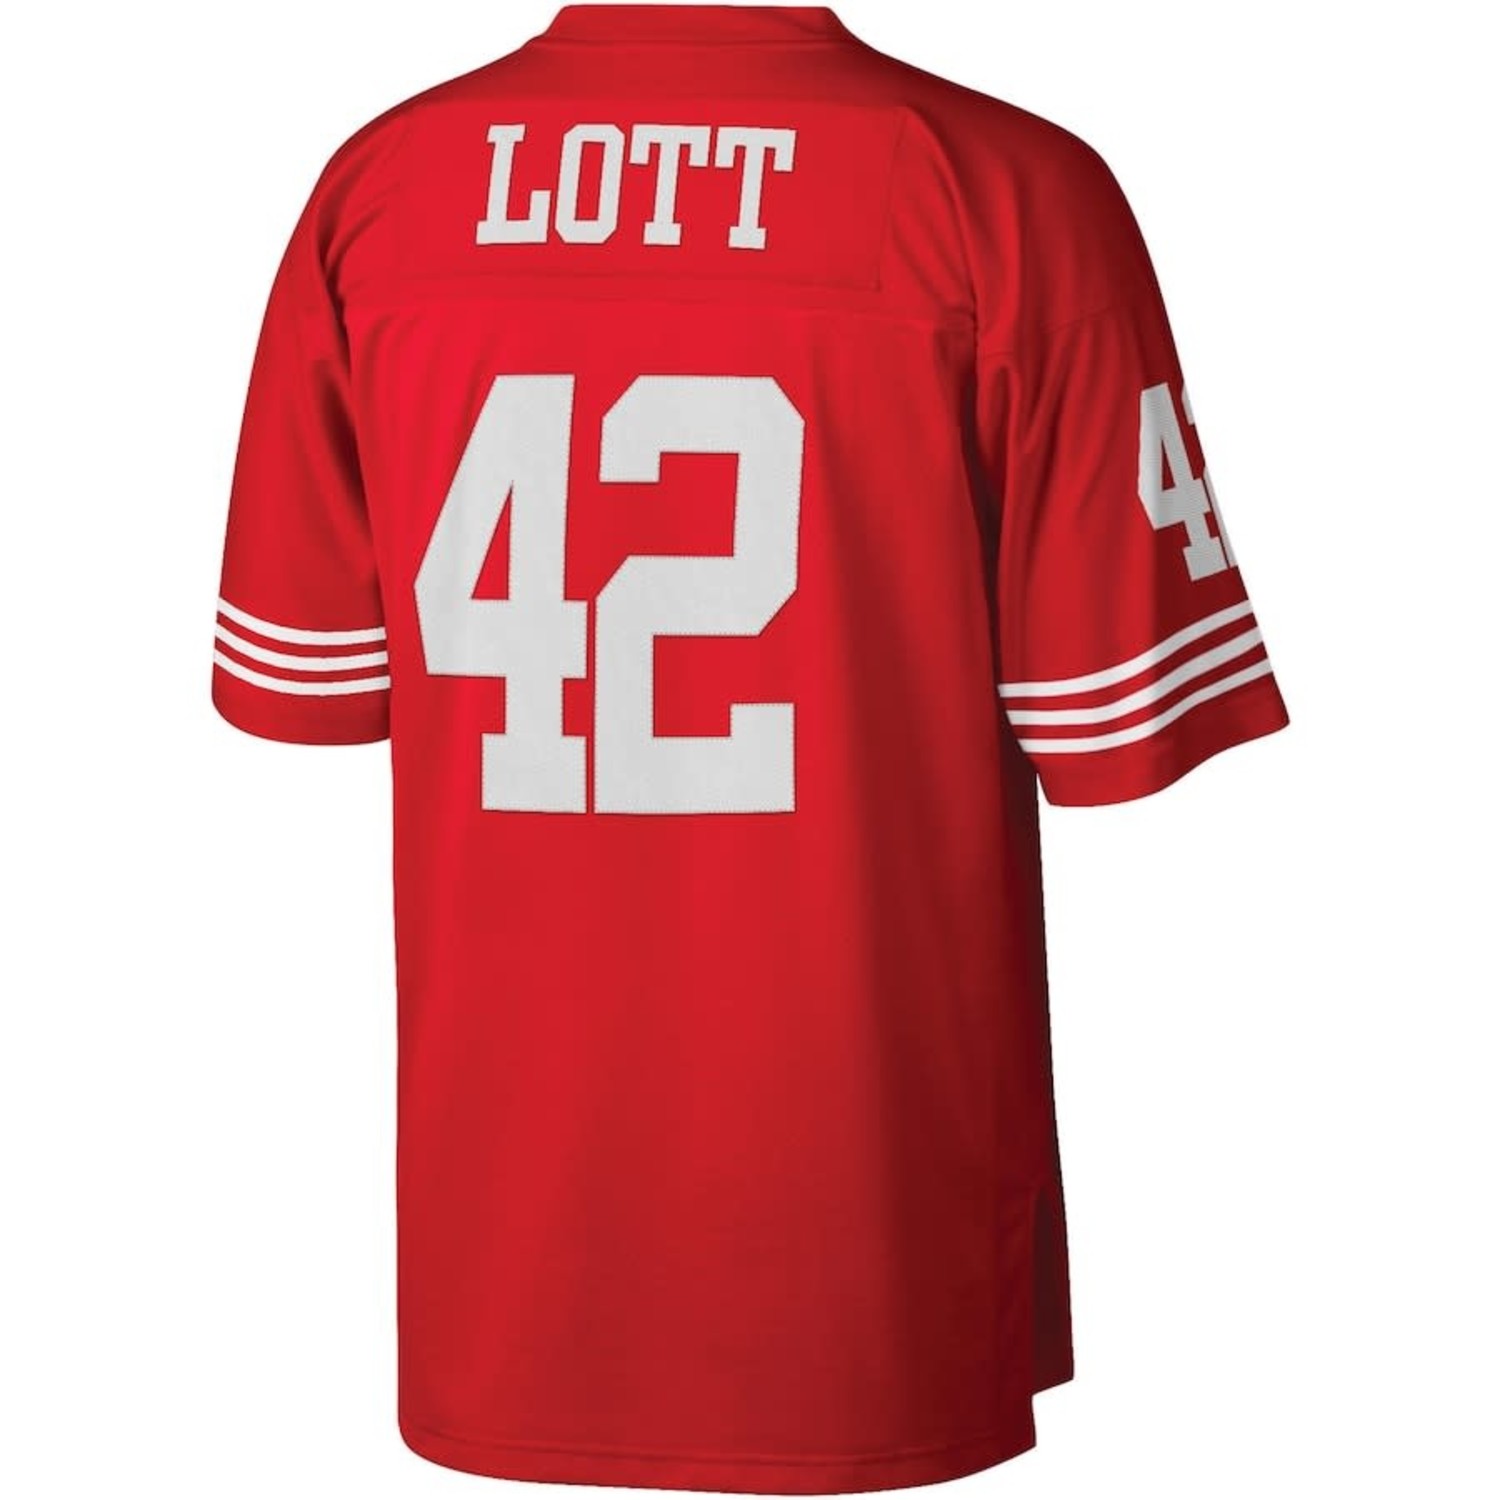 Mitchell and Ness NFL San Francisco 49ers Men's Mitchell & Ness 1990 Ronnie  Lott #42 Jersey Red